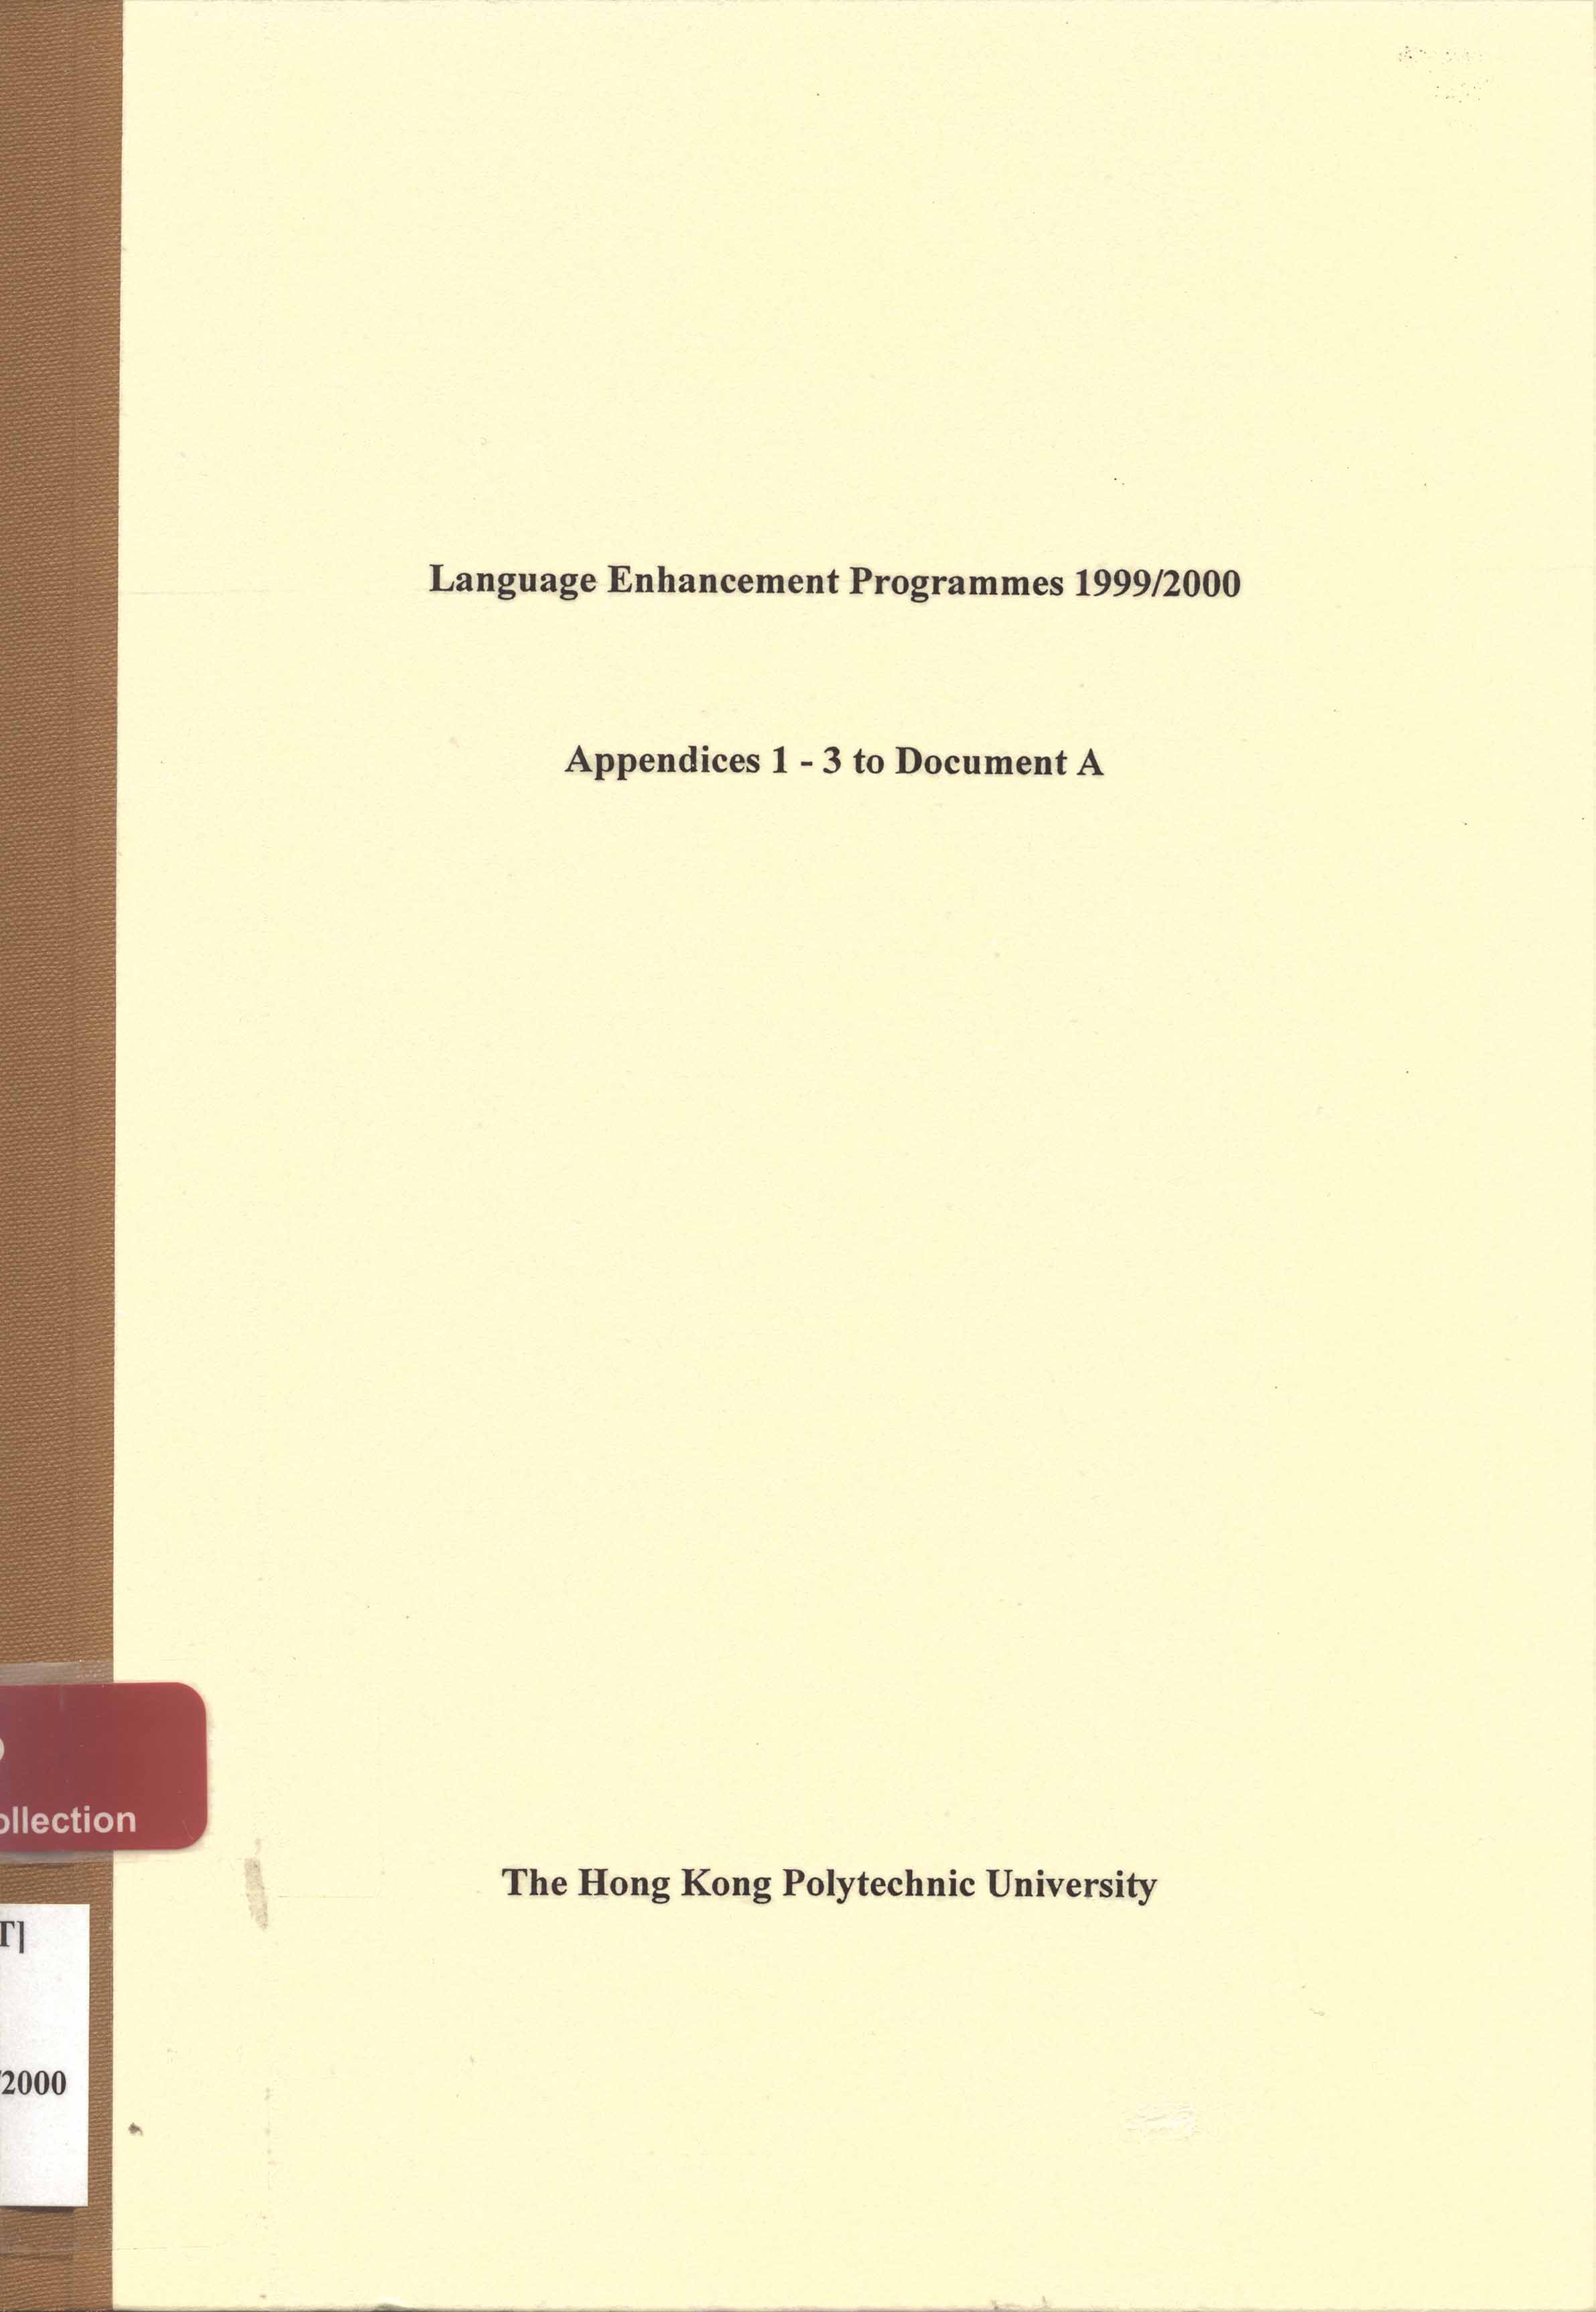 Annual report on language enhancement programmes 1999/2000 - Appendices 1 - 3 to Document A